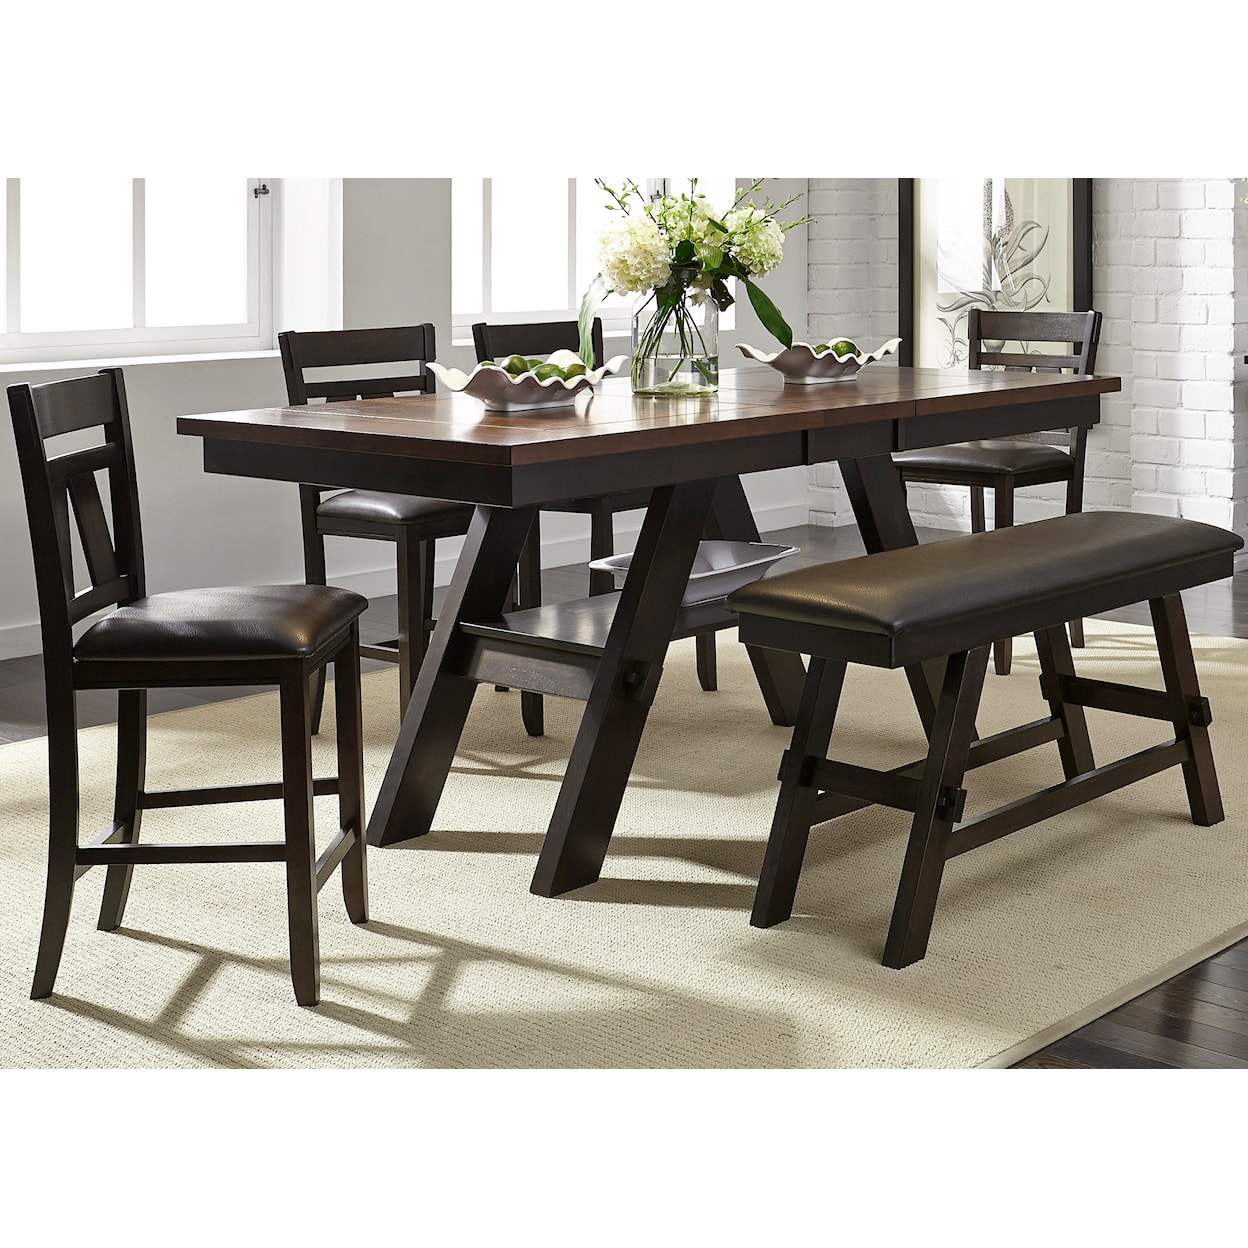 Libby Lawson 6-Piece Gathering Table Set